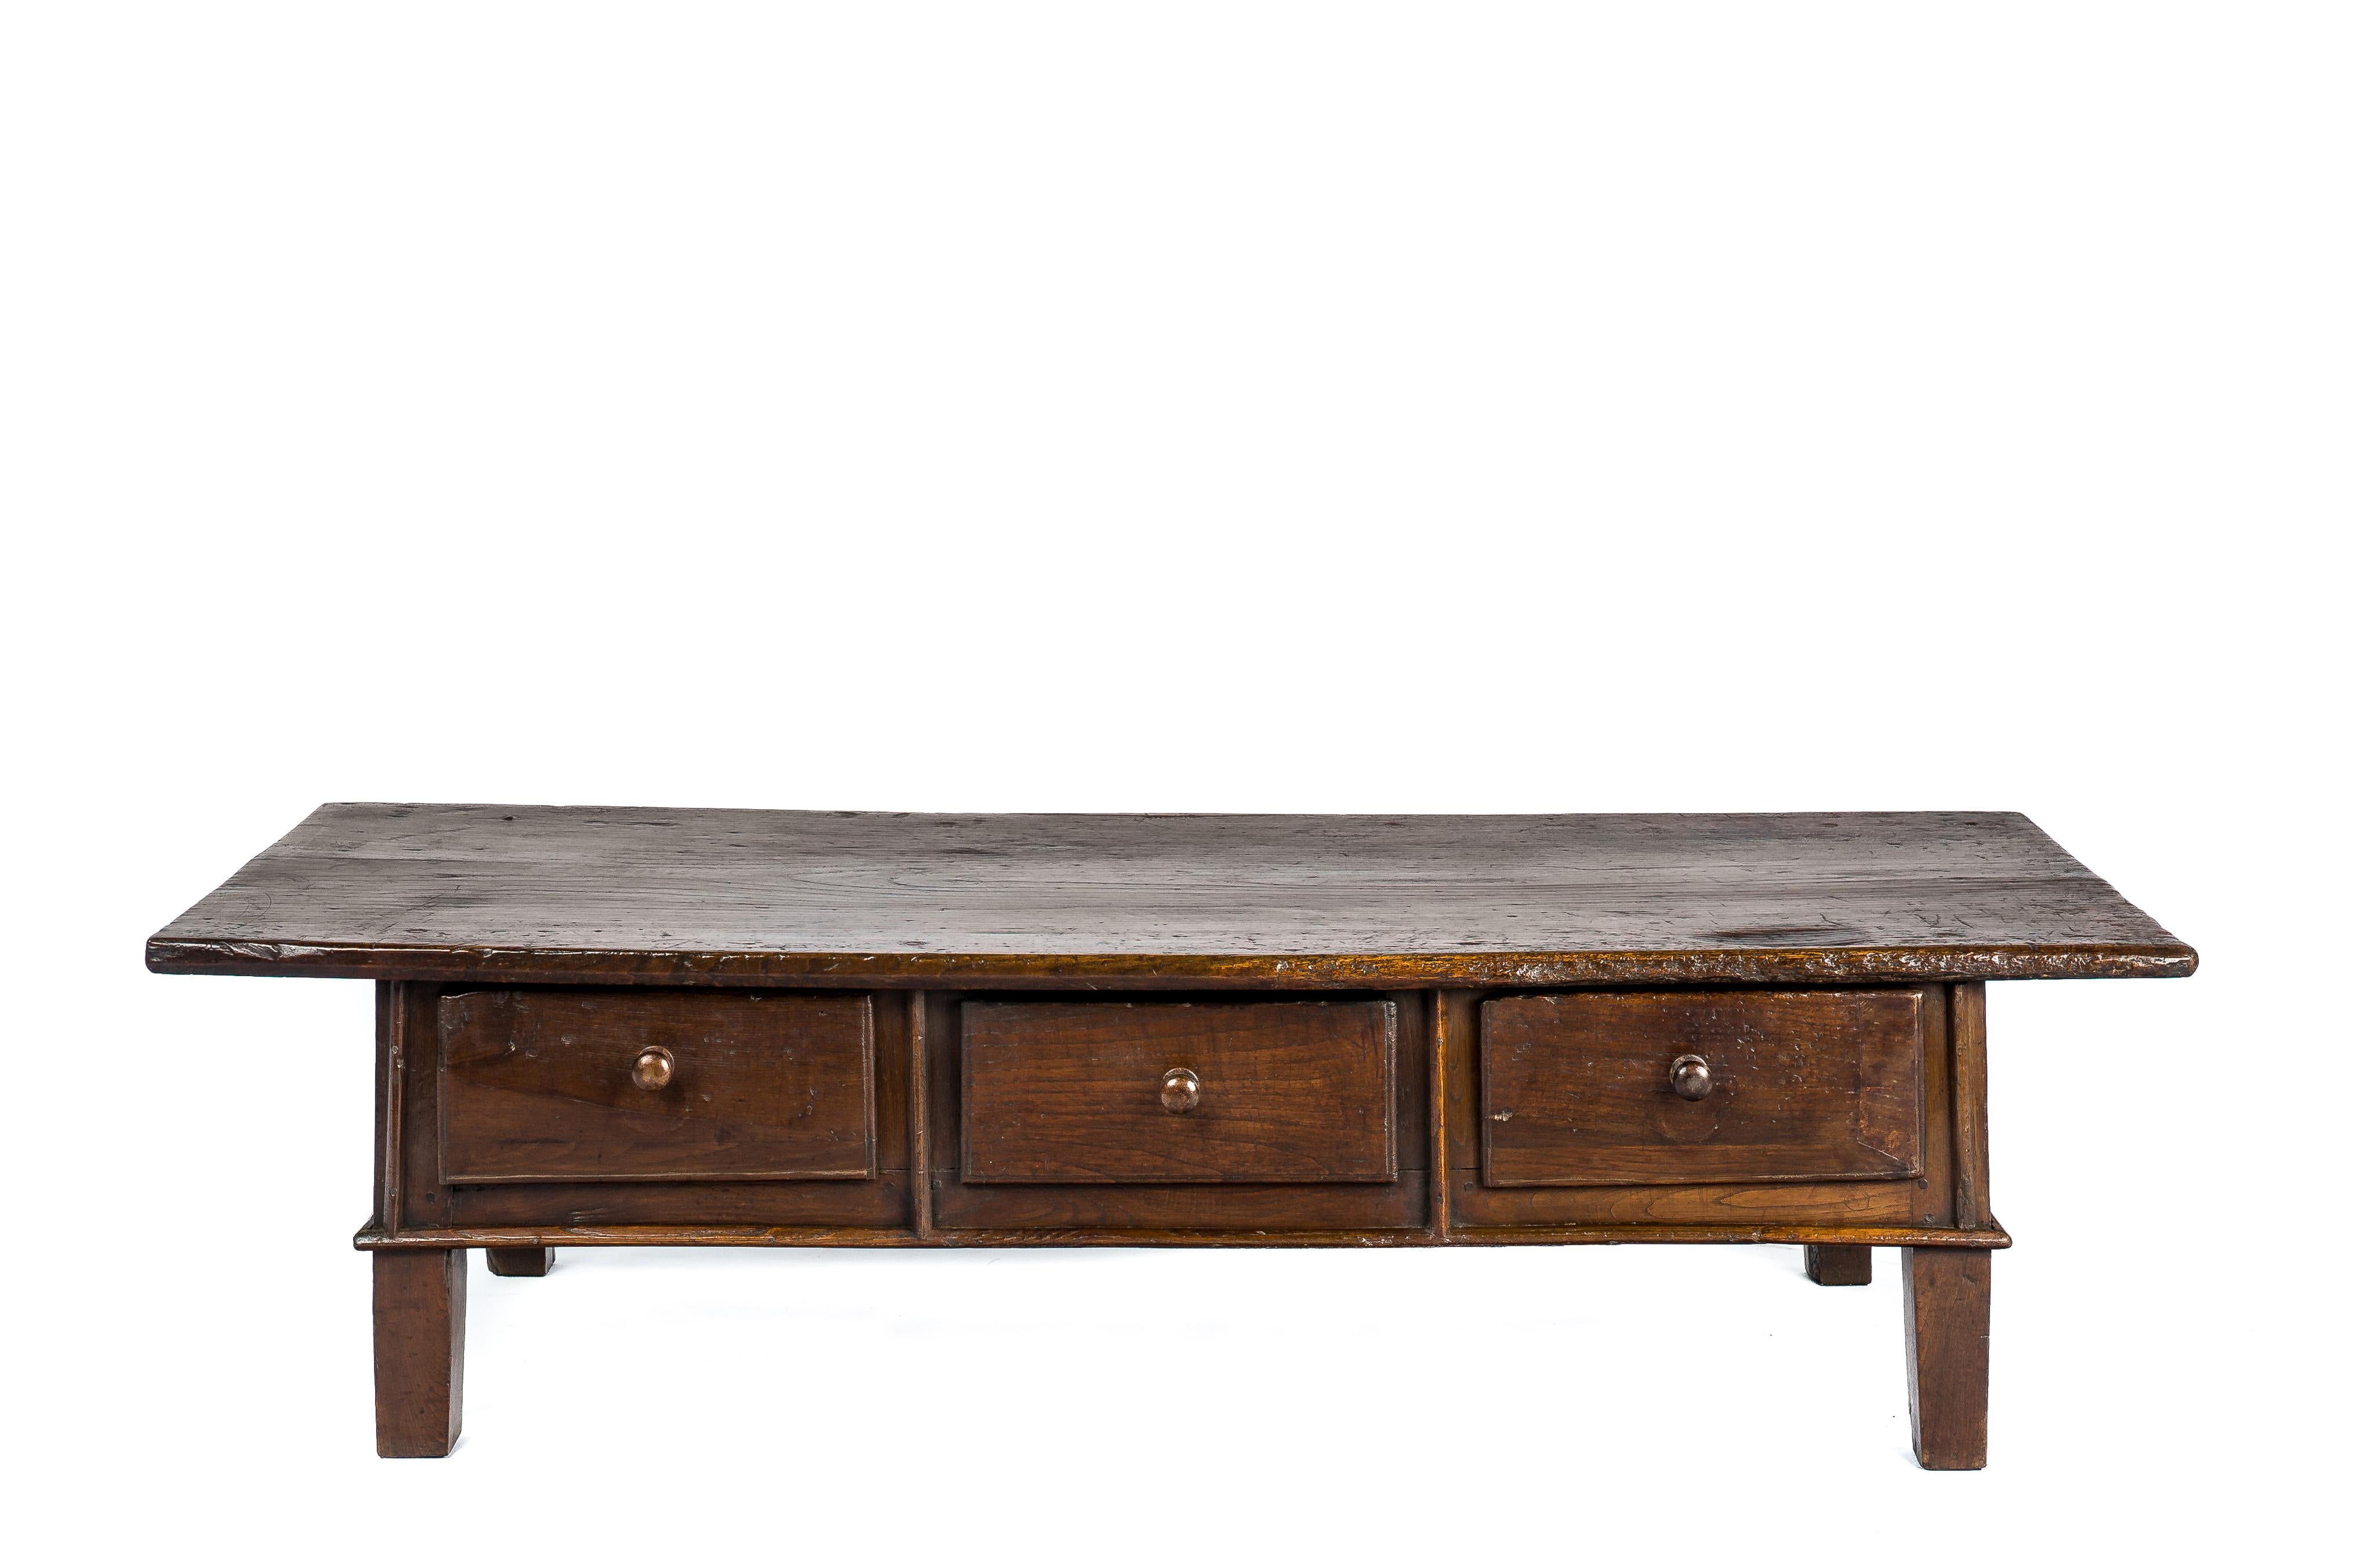 This beautiful warm brown color rustic coffee table or low table originates in Spain and dates circa 1775. The table has a fantastic top that was made from a single board of solid chestnut wood of 1,4 inches thick. The top has a beautiful grain